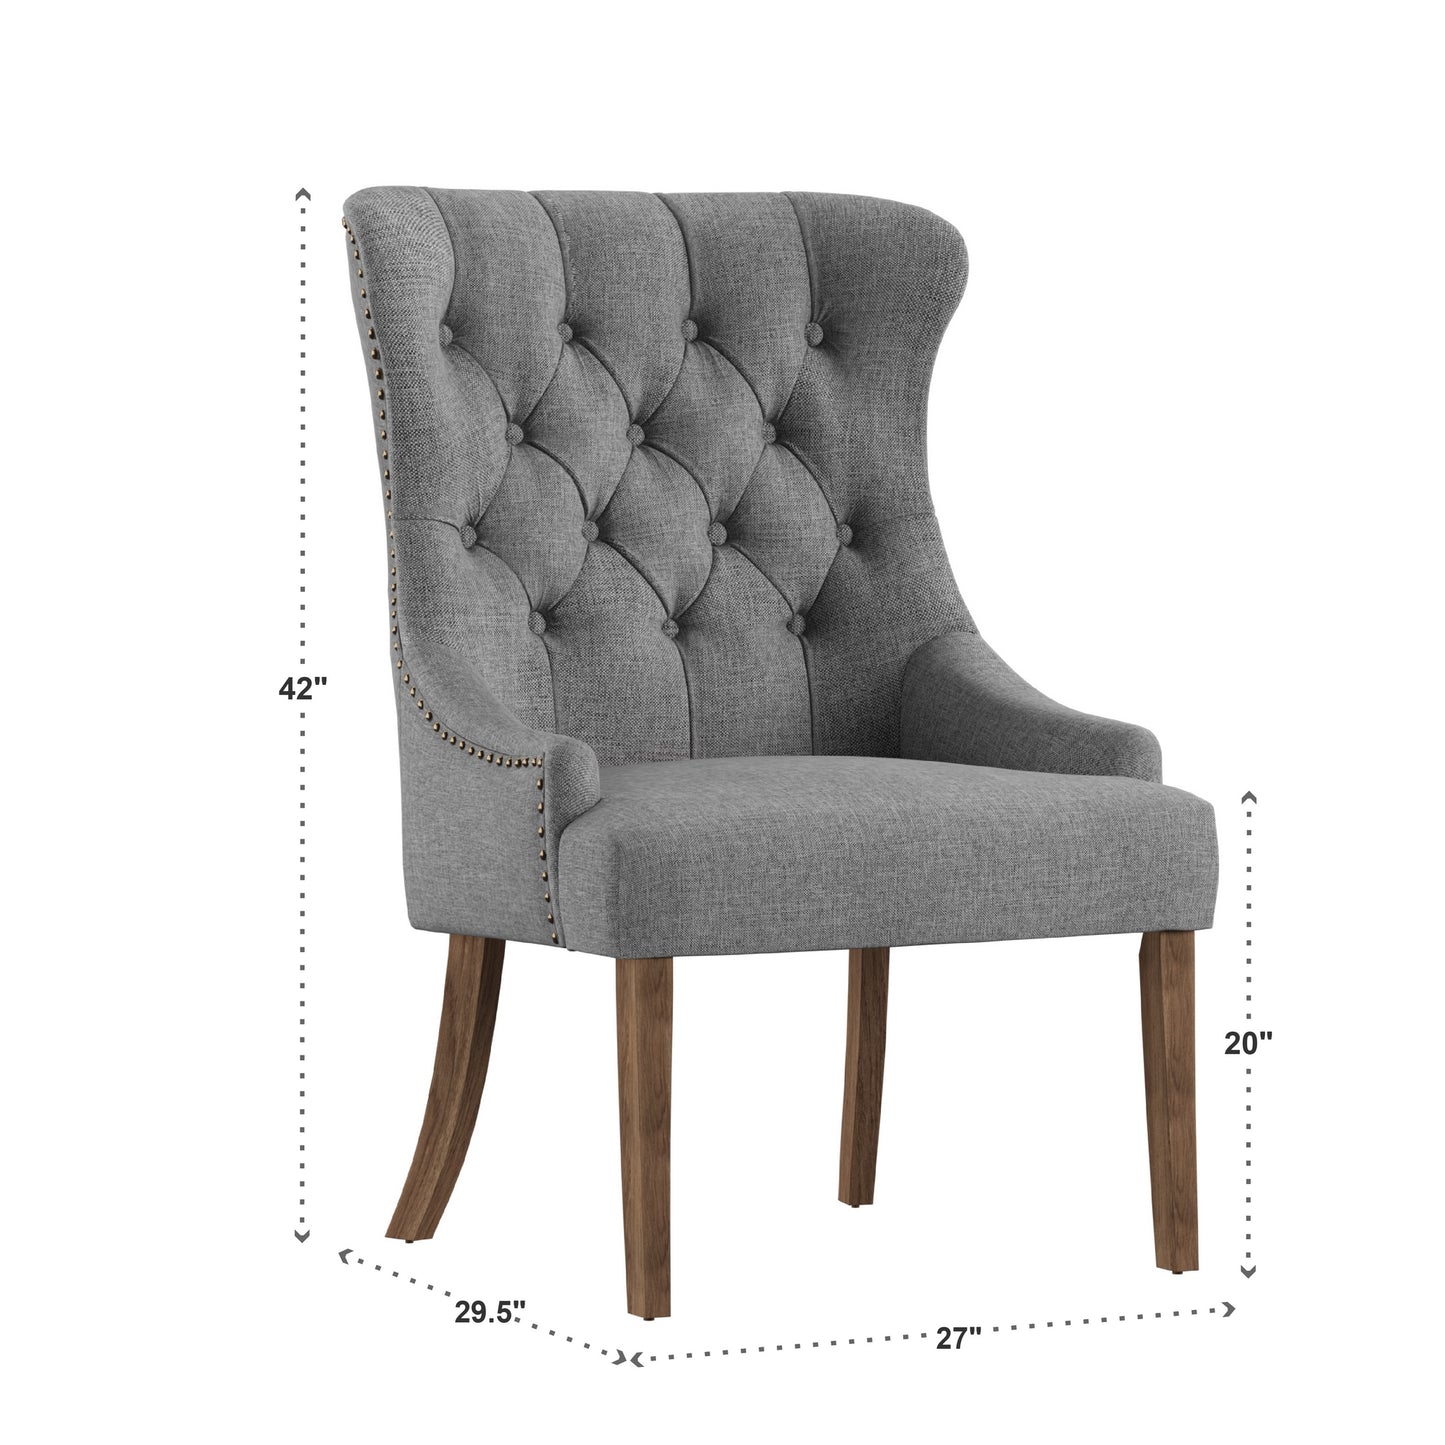 Upholstered Button Tufted Wingback Chair - Gray Linen